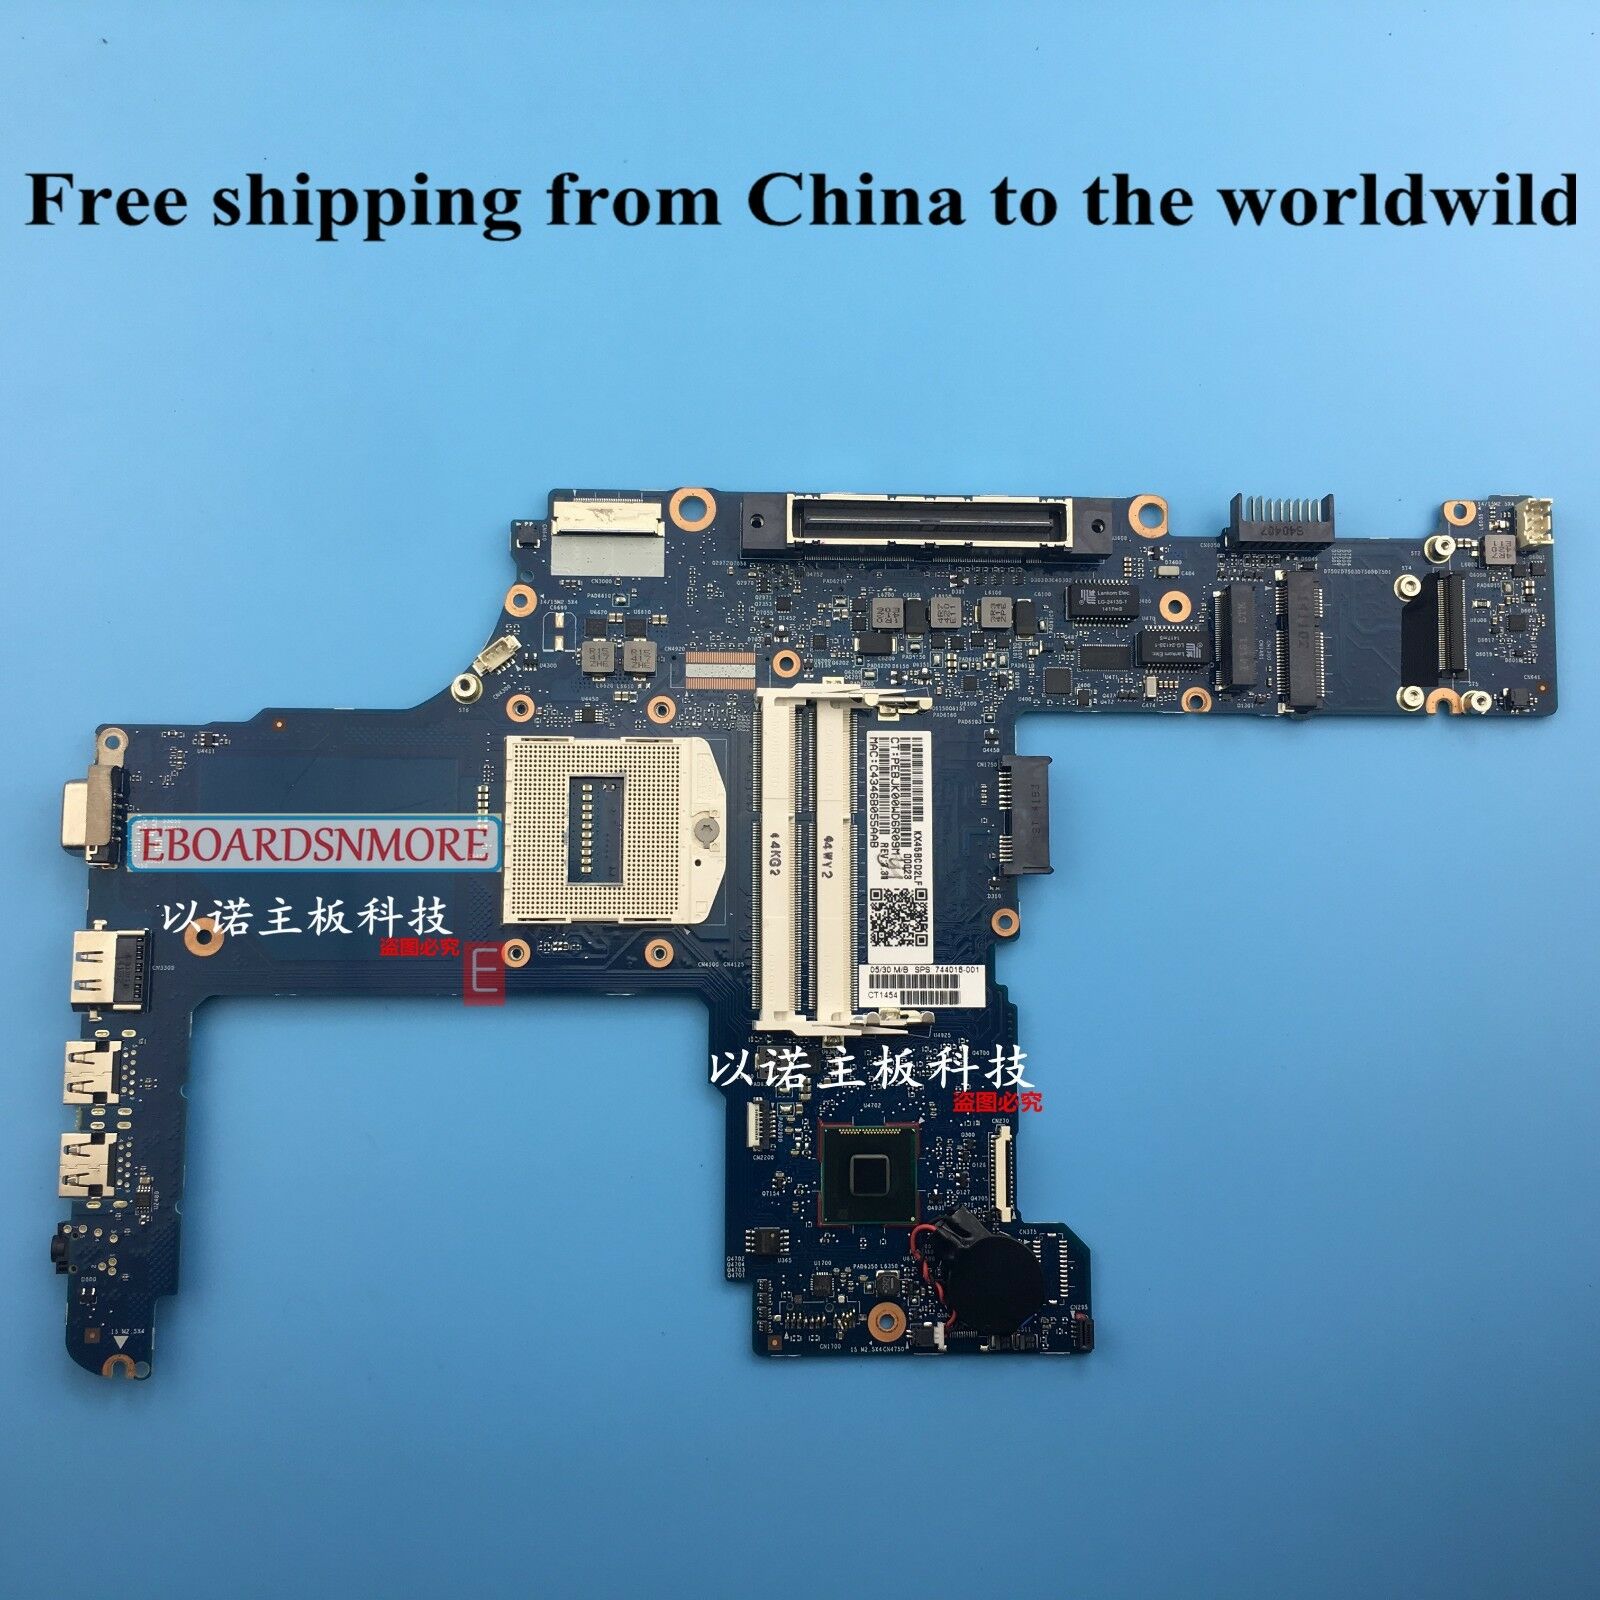 744016-001 744016-501 744016-601 HP probook 650 G1 640 G1 laptop motherboard A Compatible CPU Brand: AMD Fea